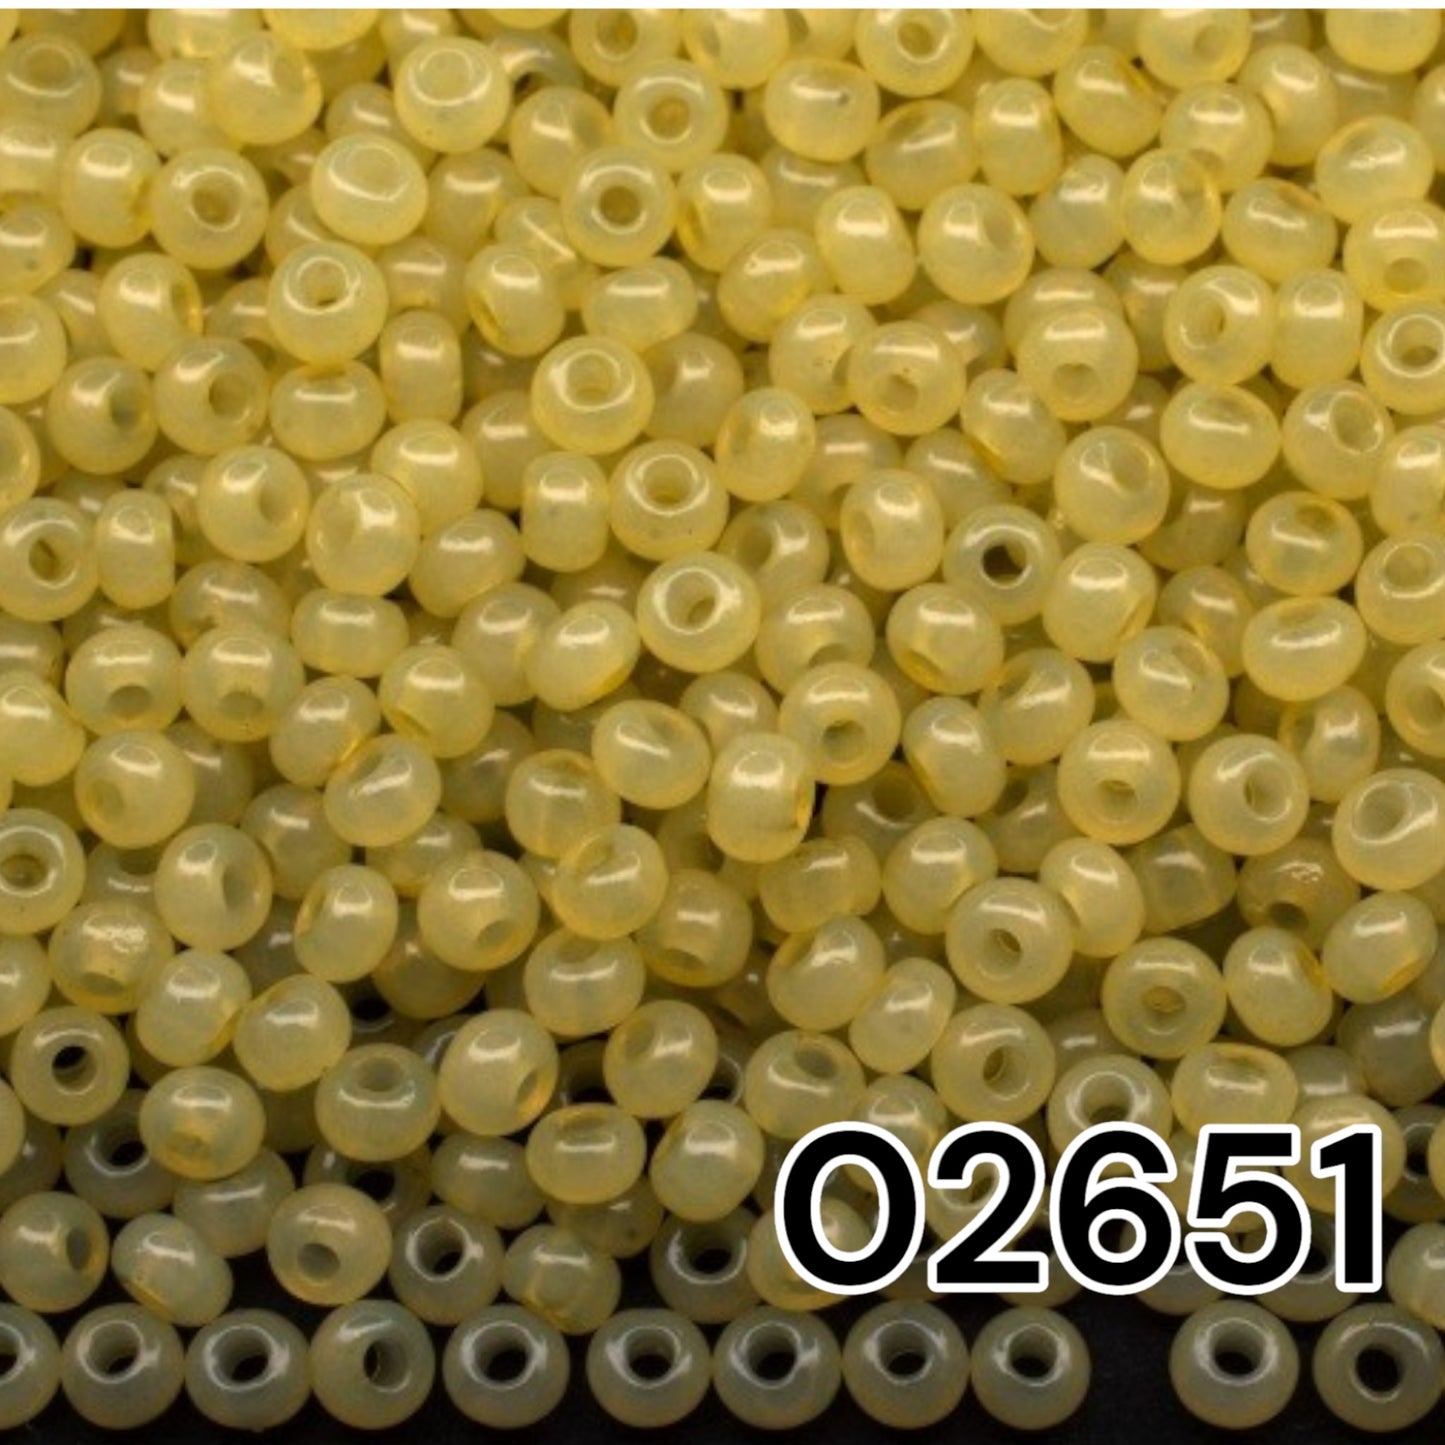 02651 Czech seed beads PRECIOSA round 10/0 olive. Alabaster - Solgel Dyed.